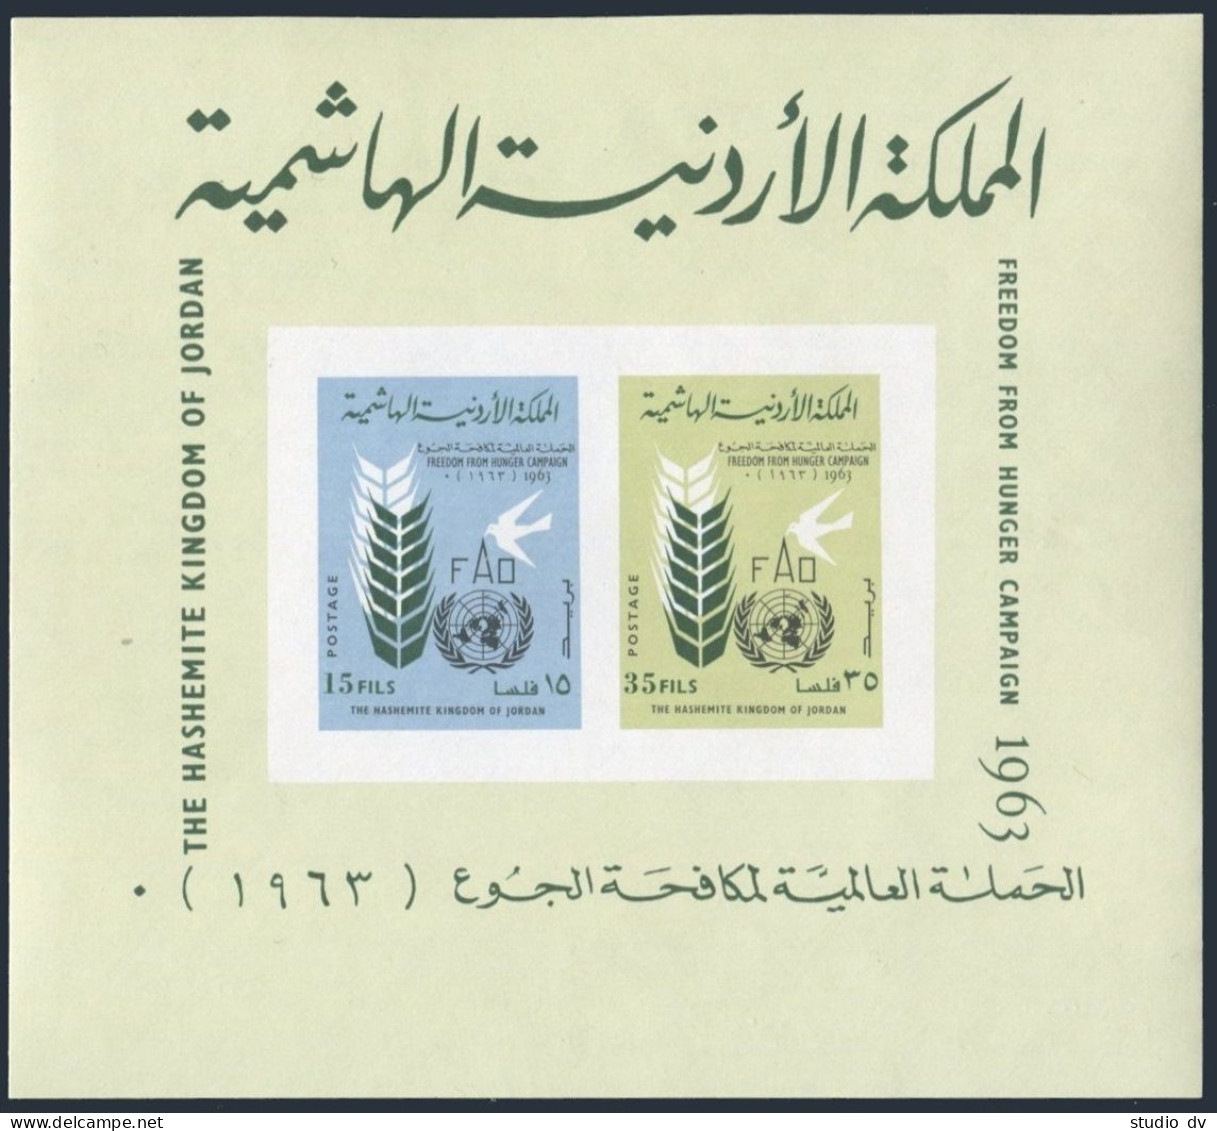 Jordan 399a,399a Imperf,MNH. Michel Bl.4A-4B. FAO Freedom From Hunger, 1963. - Giordania